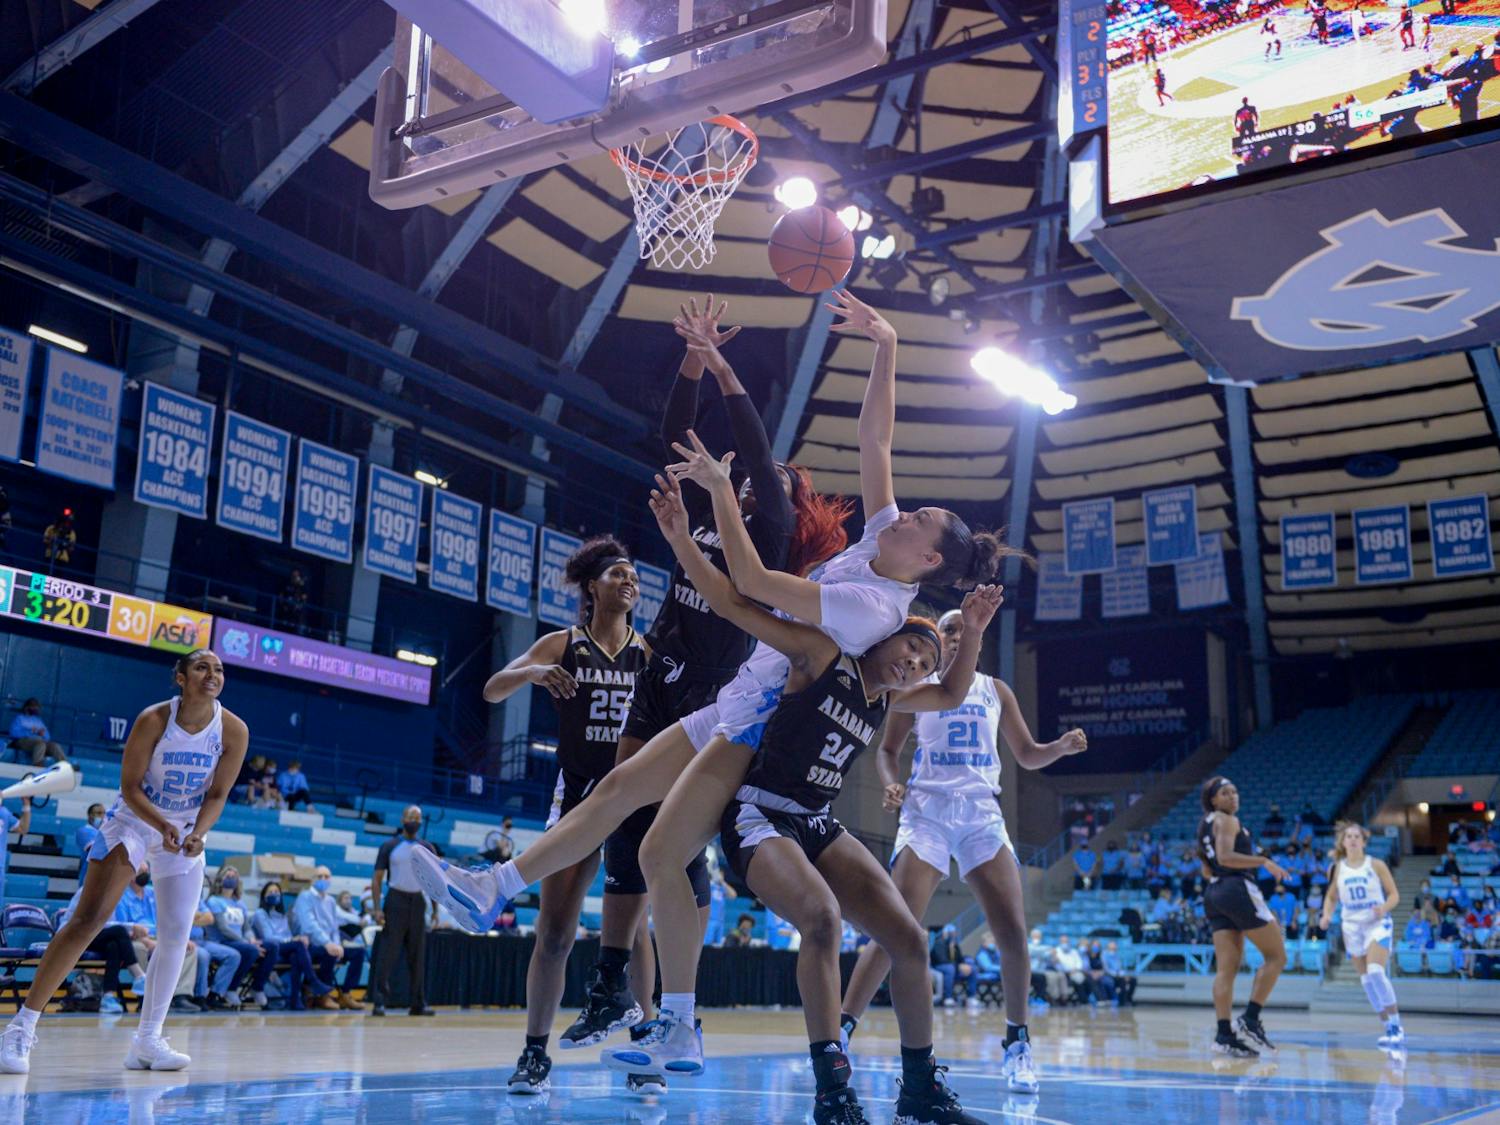 First-year guard/forward Destiny Adams (20) shoots the ball in the game against Alabama State in Carmichael Arena, on Dec 21, 2021.